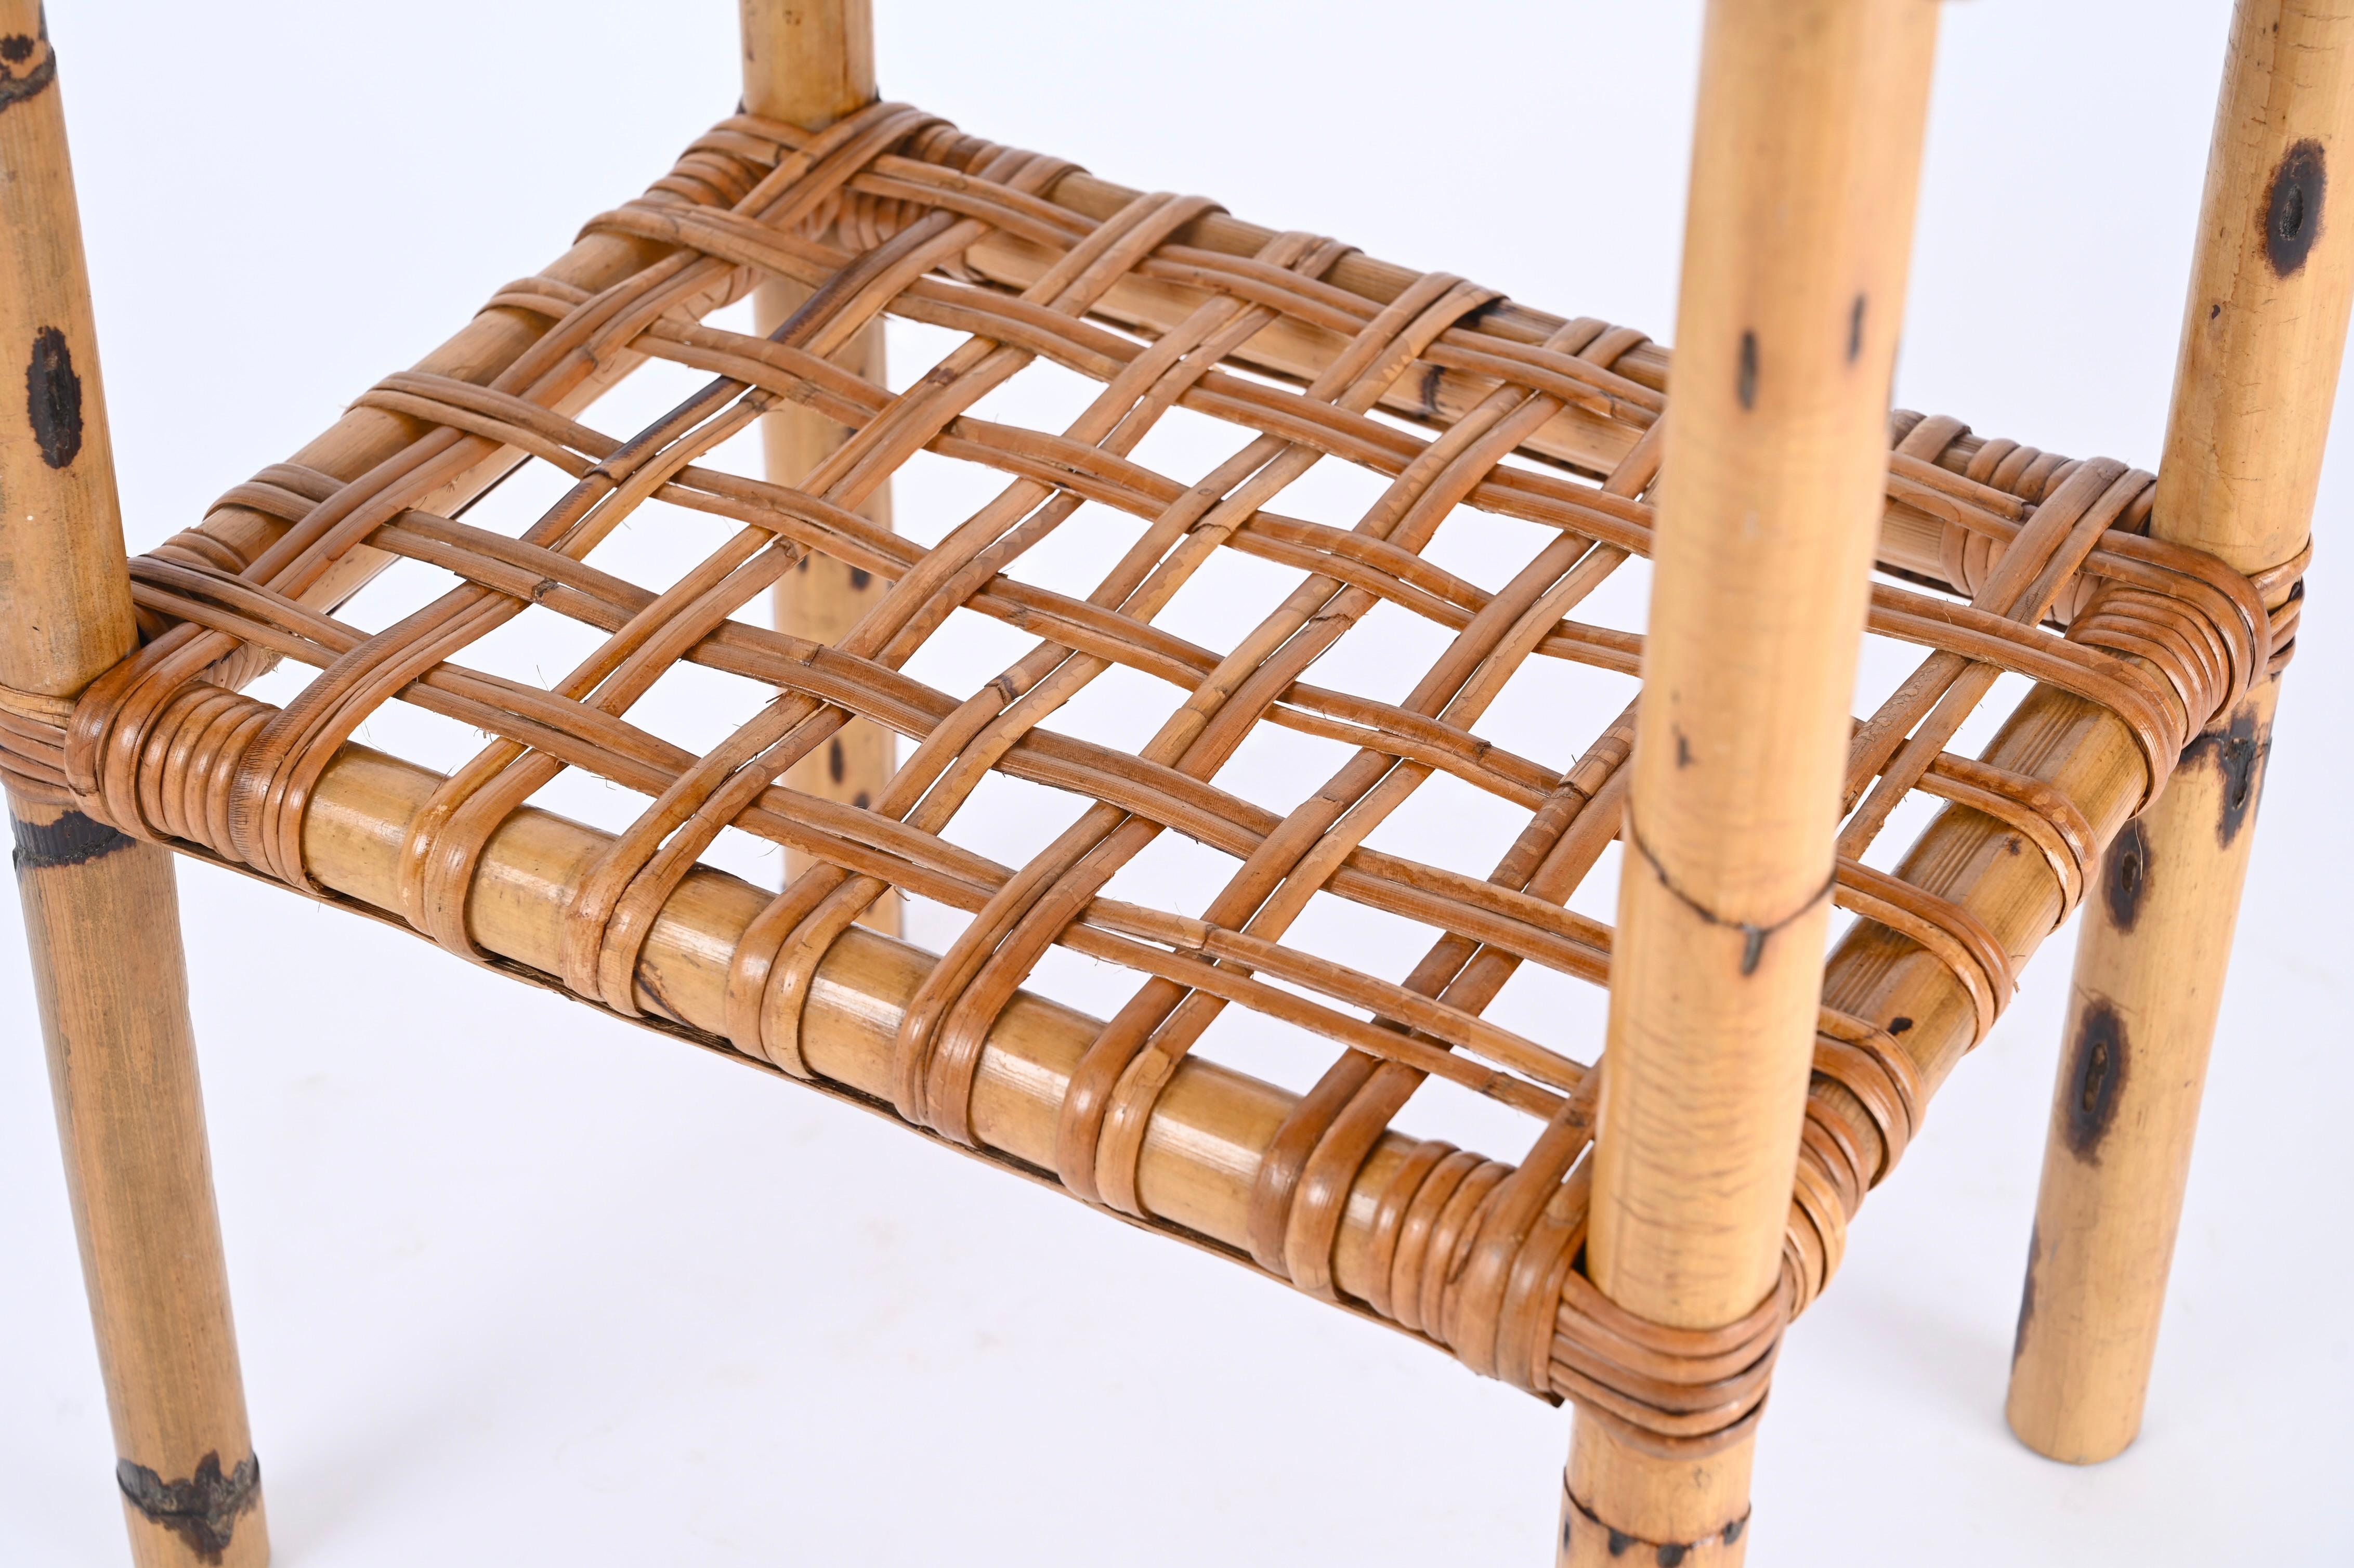 Mid-20th Century Midcentury Bamboo and Rattan Italian Coffee Table with Magazine Rack, 1960s For Sale